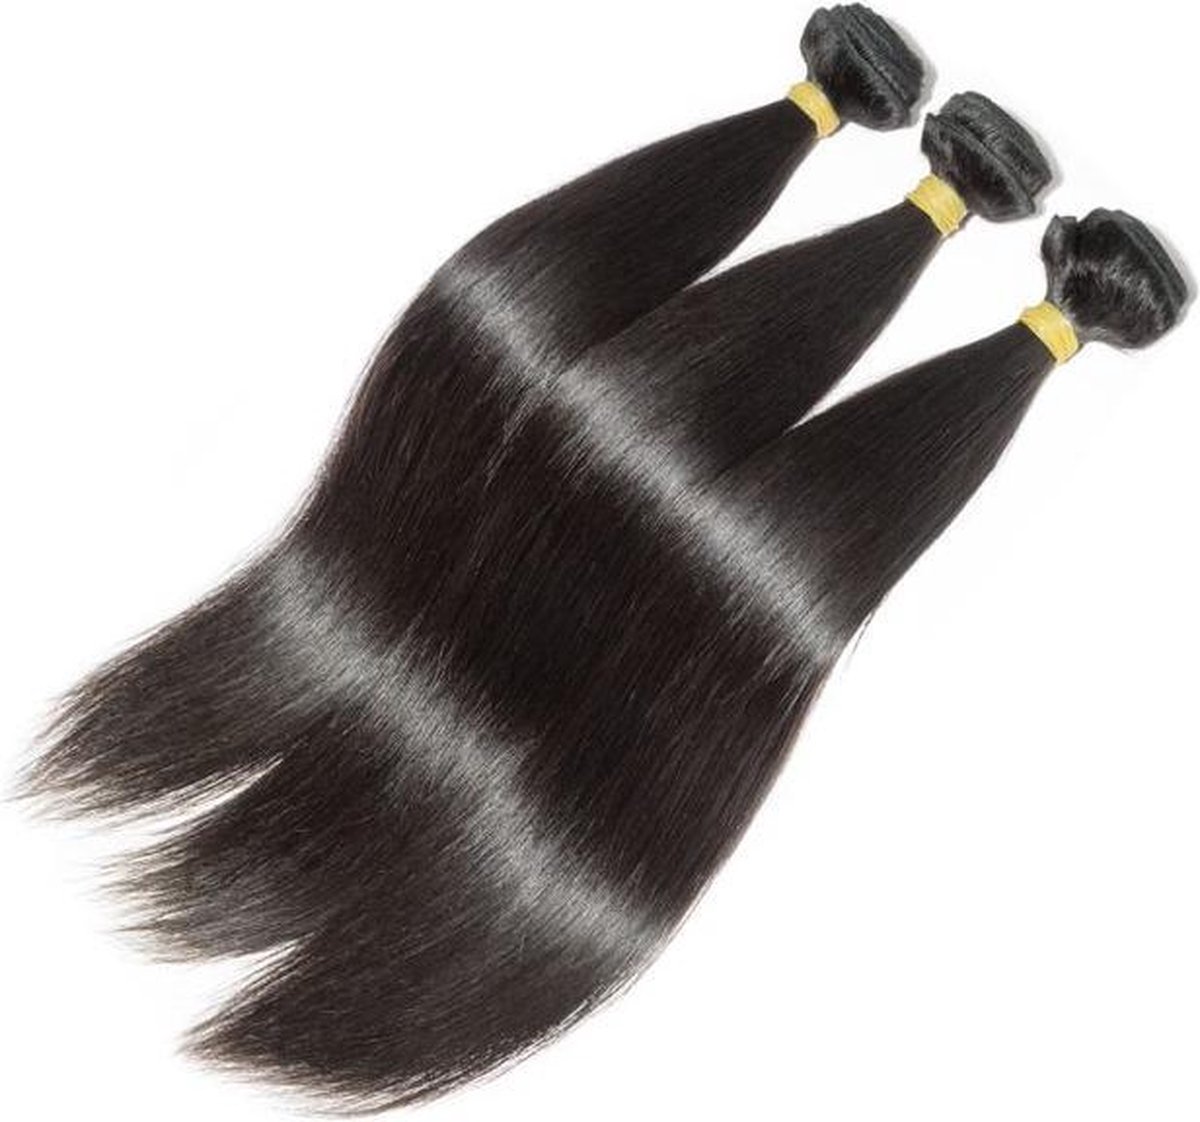 Brazillian hair weave extensions straight 14 inch 35 cm